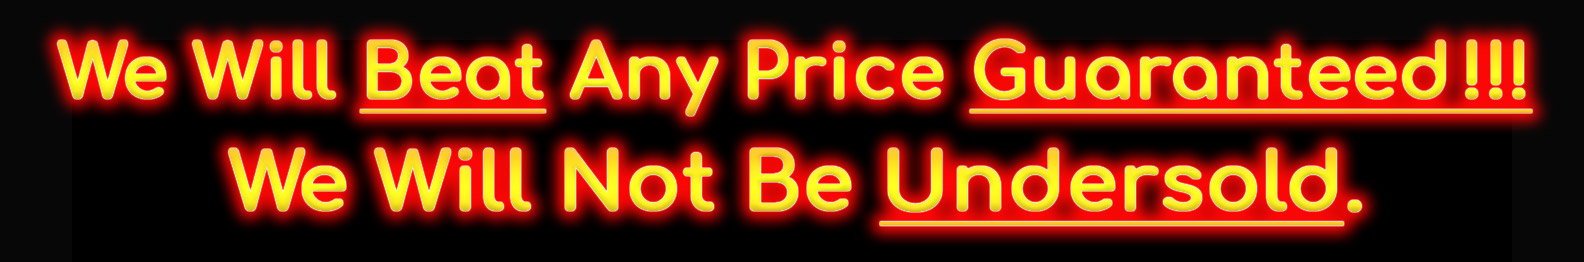 We Will Beat Any Price Guaranteed!!! We Will Not Be Undersold.